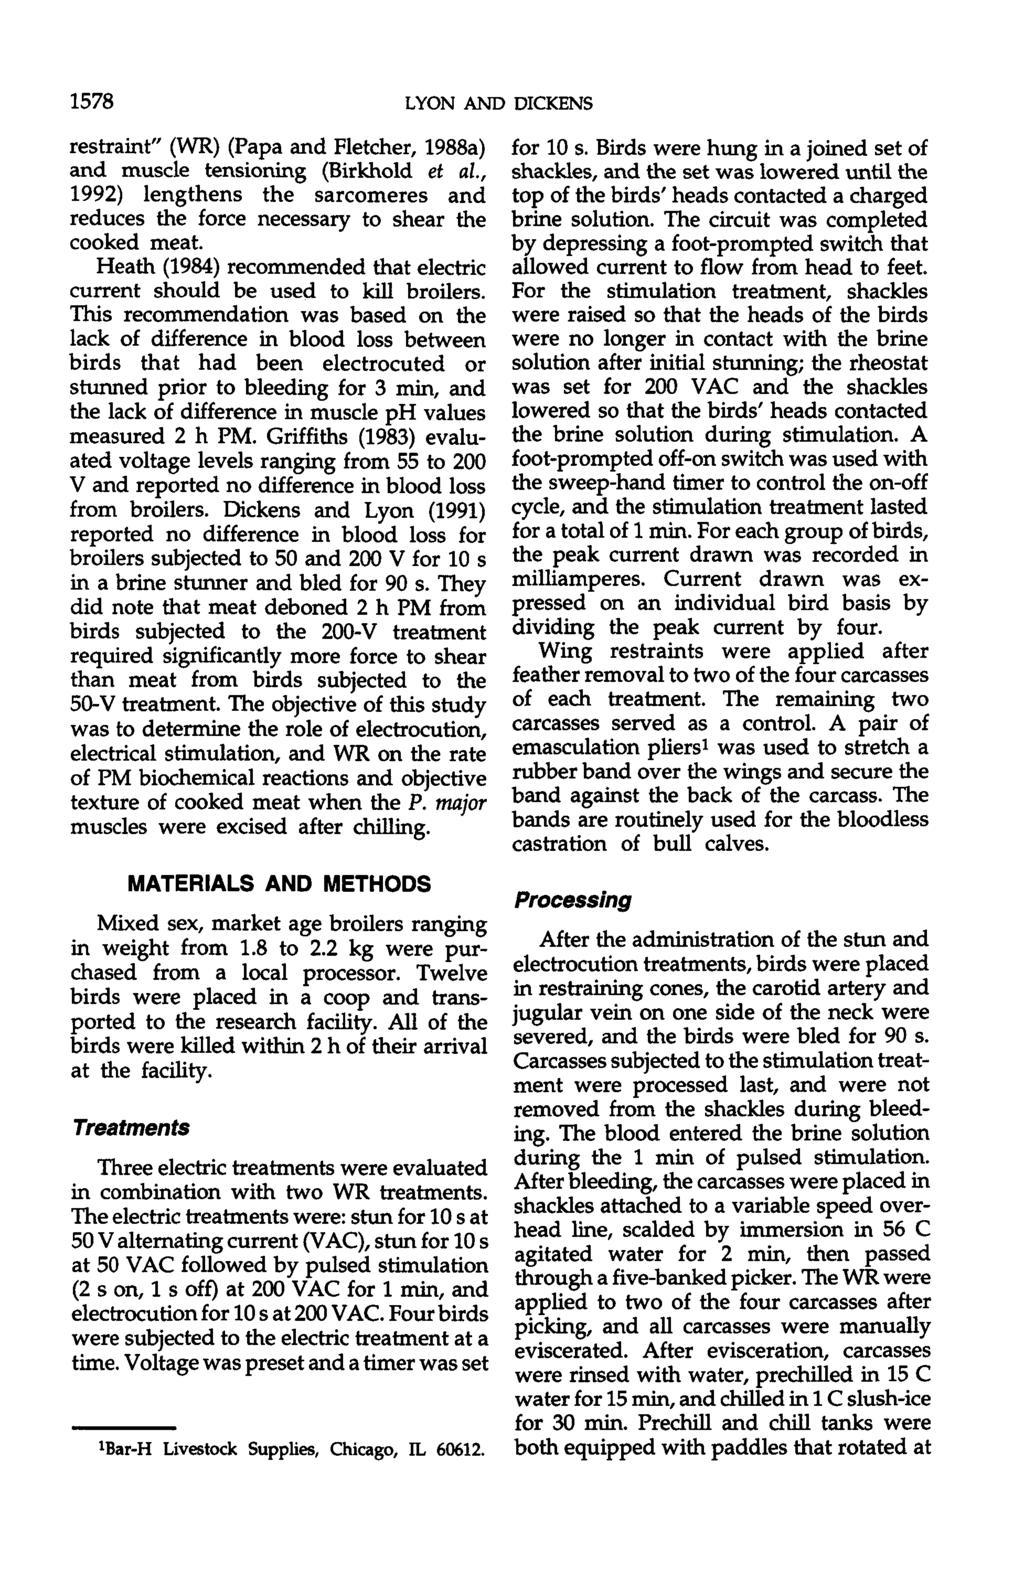 1578 LYON AND DICKENS restraint" (WR) (Papa and Fletcher, 1988a) and muscle tensioning (Birkhold et ah, 1992) lengthens the sarcomeres and reduces the force necessary to shear the cooked meat.